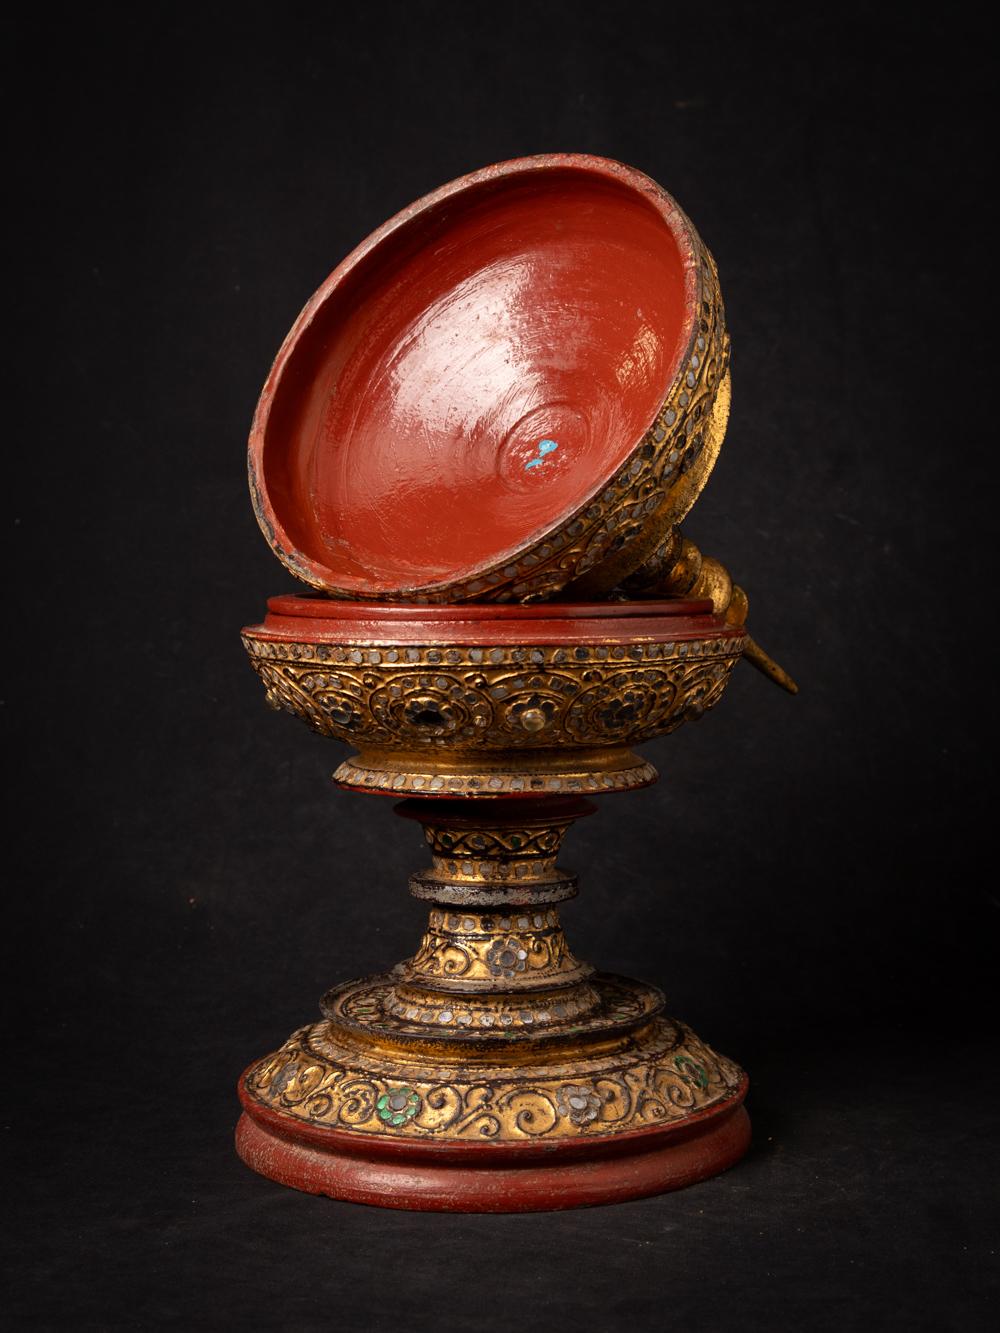 The antique wooden Burmese offering vessel is a remarkable and culturally significant artifact originating from Burma. Crafted from wood and gilded with 24-karat gold, this offering vessel stands at 49.8 cm in height and has a diameter of 20.8 cm.